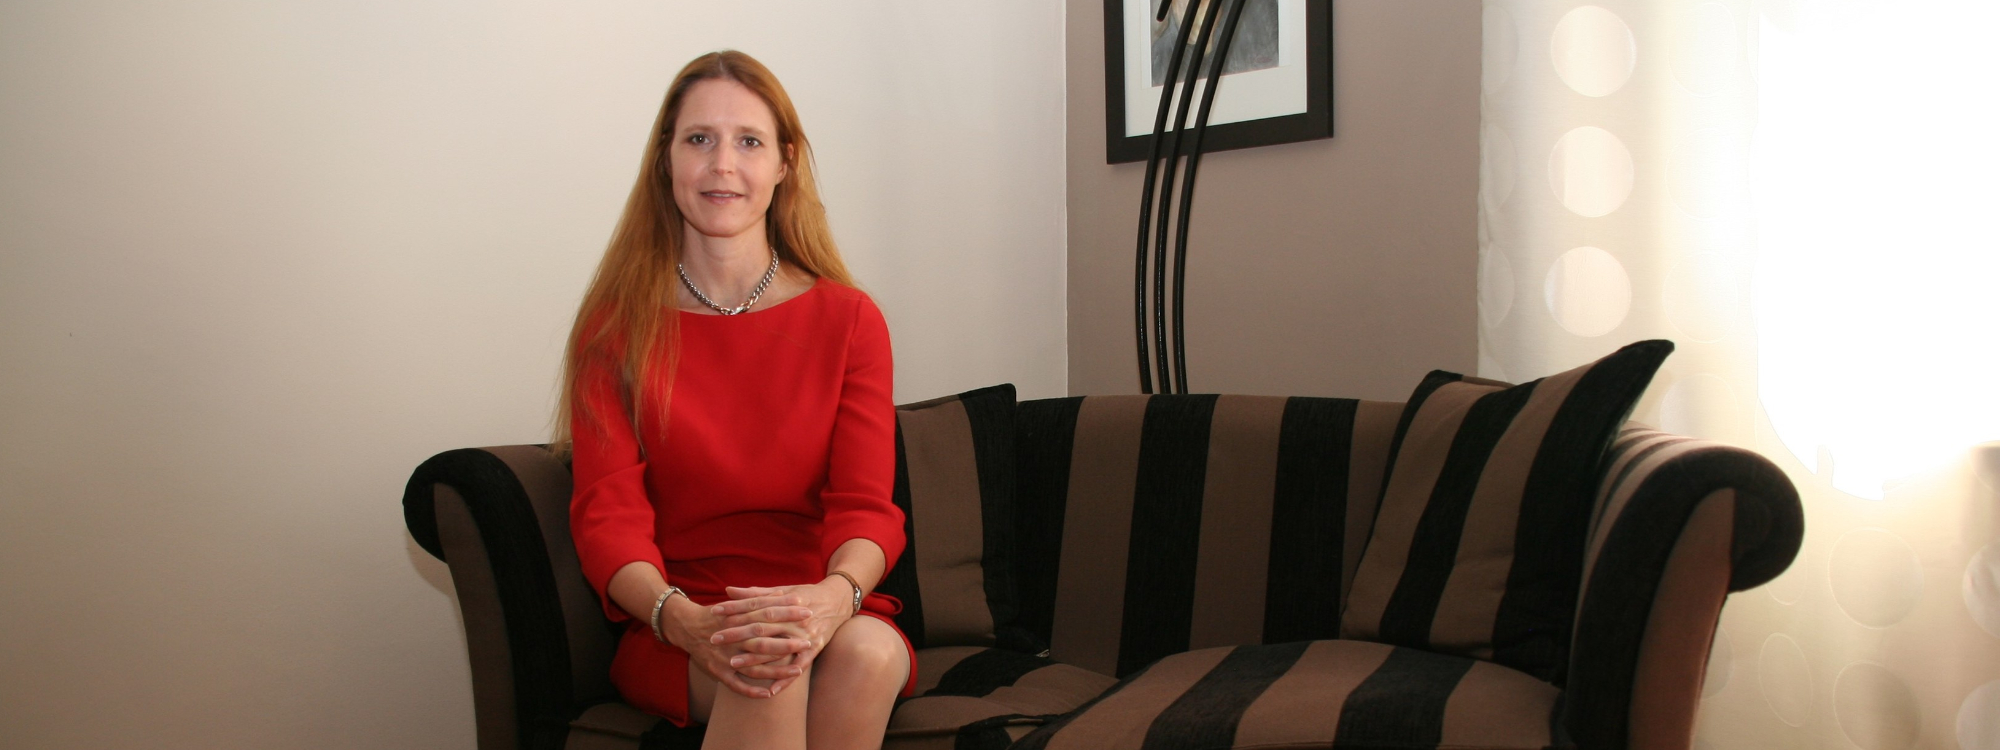 Mentor Series - Zsuzsanna Recsey, business leader and personal performance coach